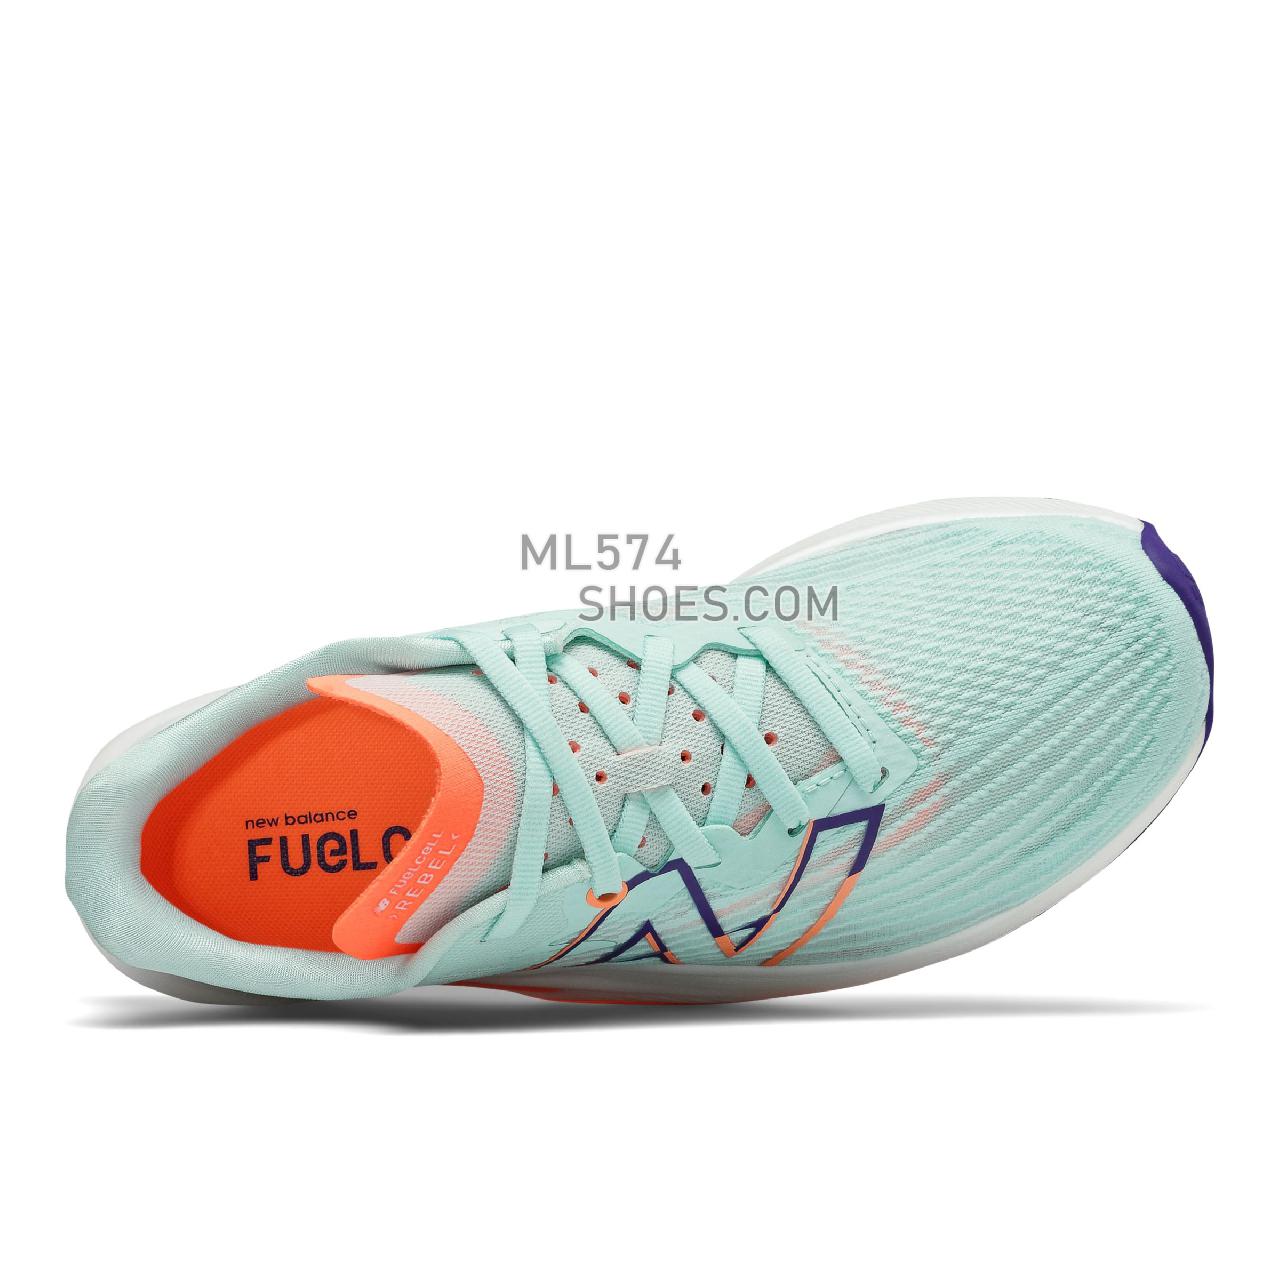 New Balance FuelCell Rebel v2 - Women's Neutral Running - White Mint with Citrus Punch - WFCXLP2